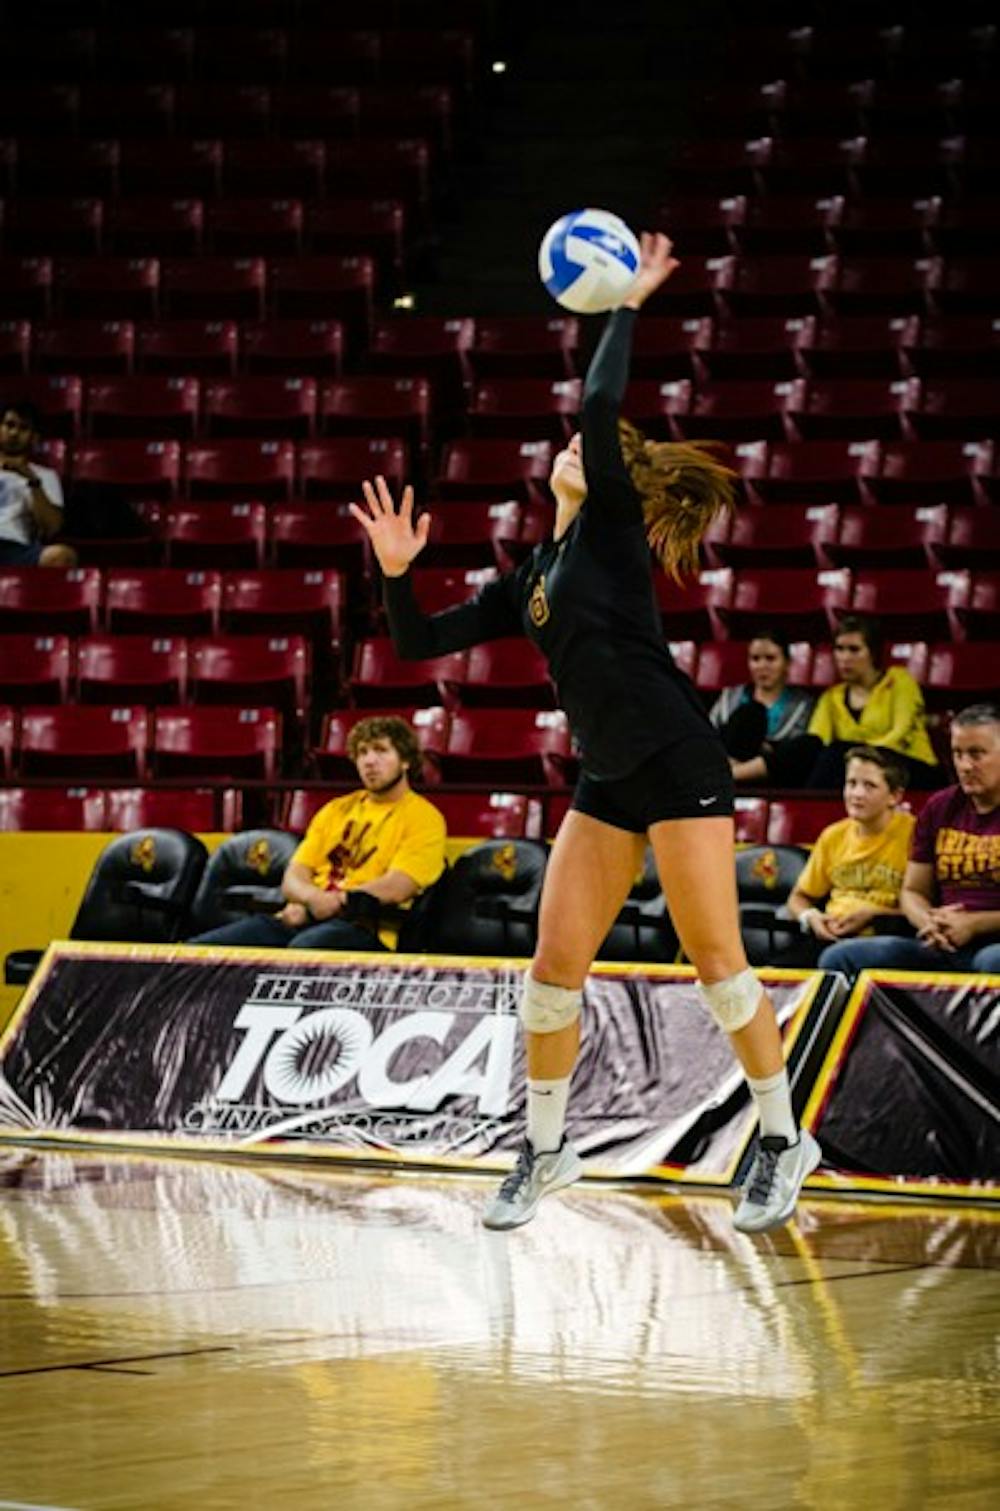 Senior libero Stephanie Preach serves at a home game against Colorado on November 4th, 2013.  There is still a fierce competition to replace Preach at the libero spot for the 2014 season. (Photo by Andrew Ybanez)